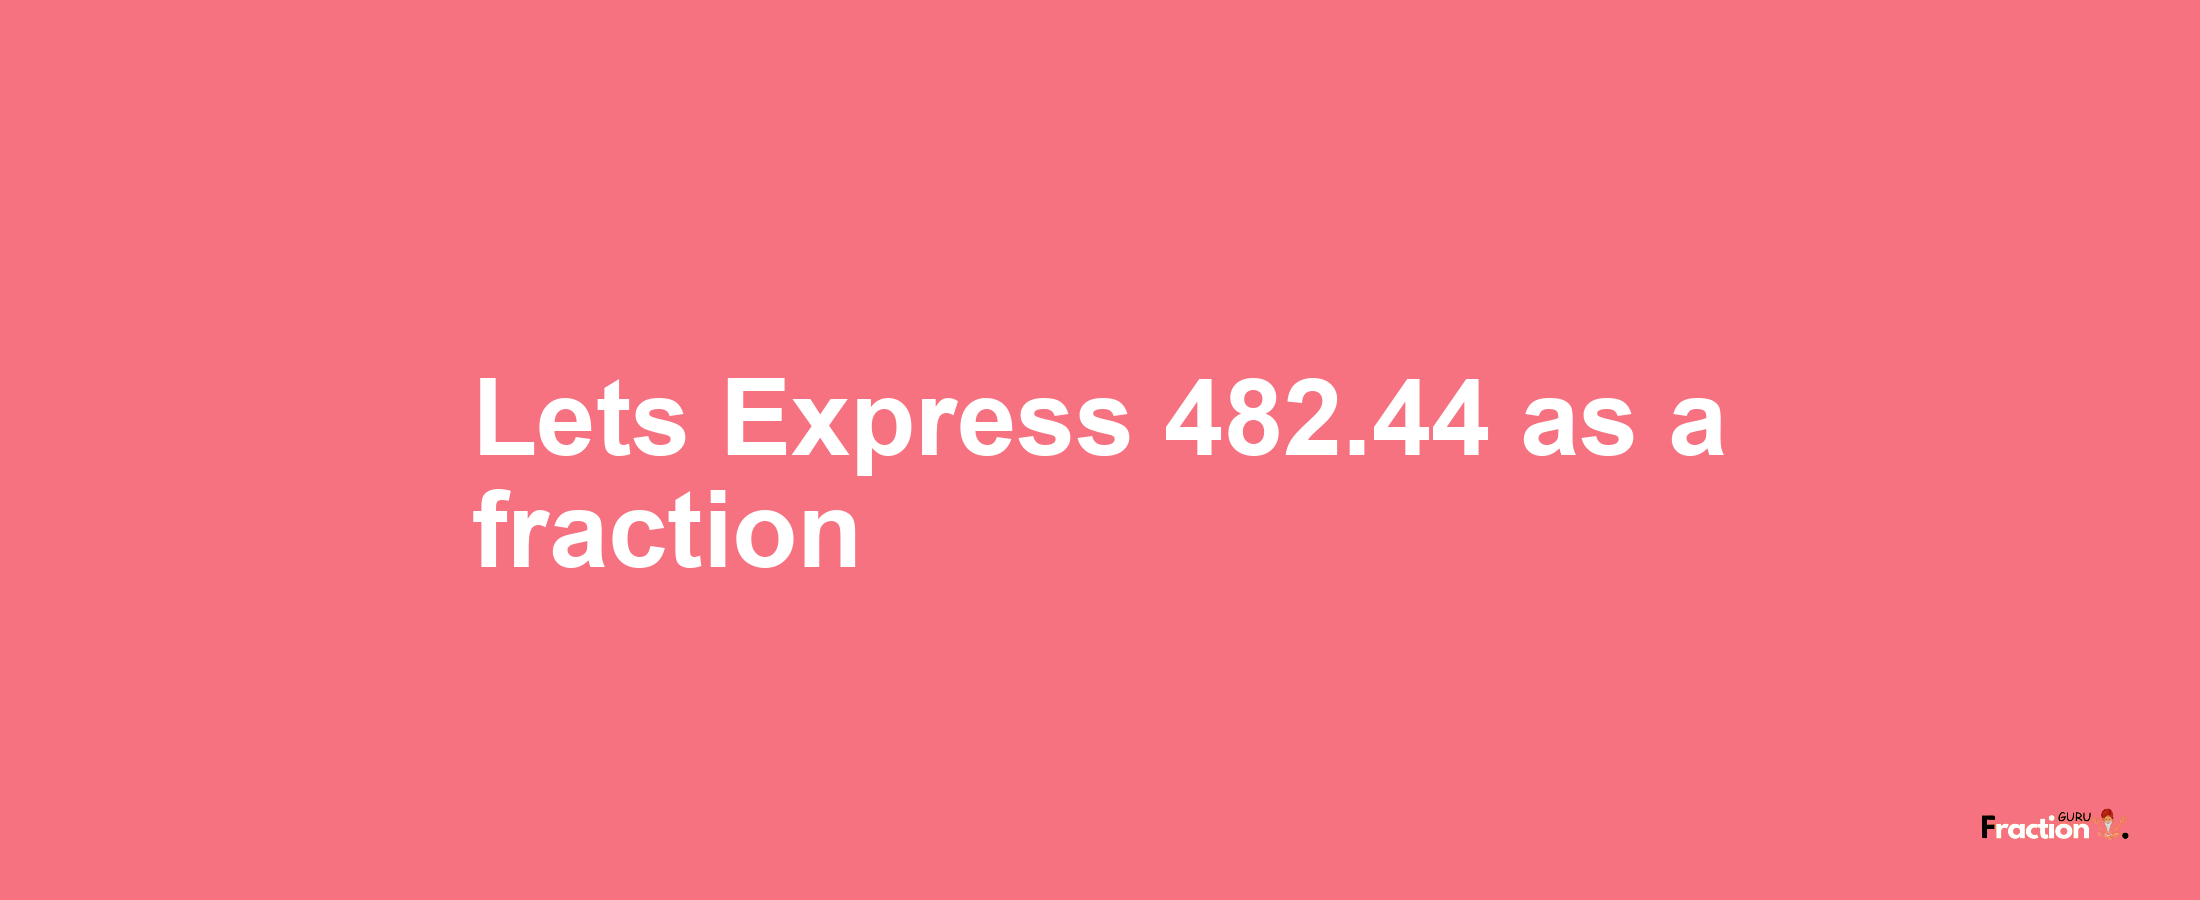 Lets Express 482.44 as afraction